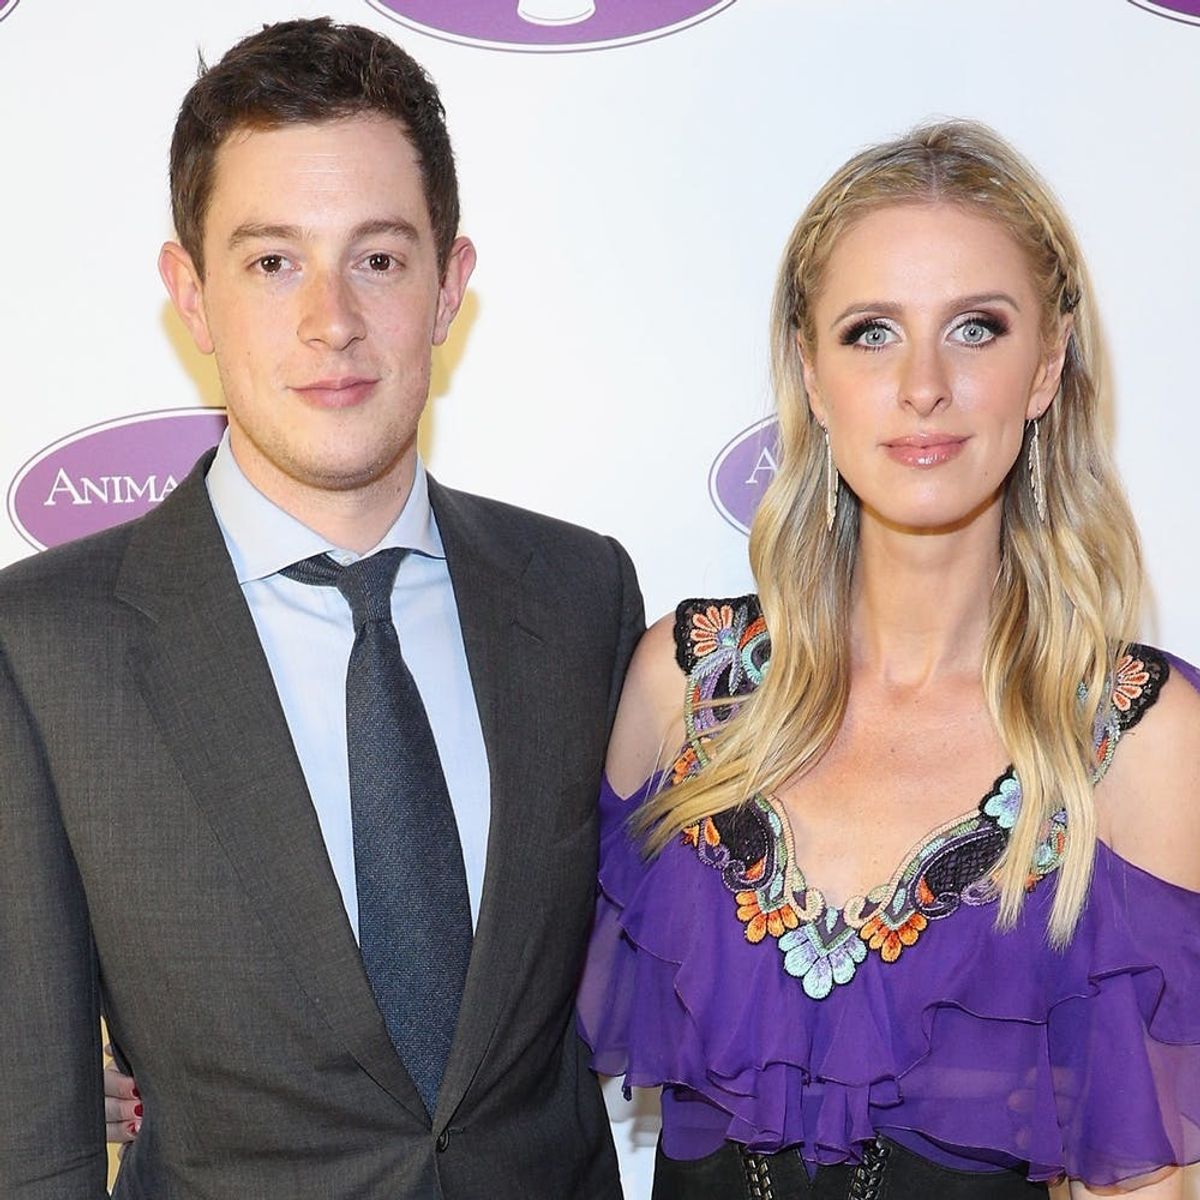 Nicky Hilton Rothschild Welcomes Baby #2! Find Out Her Meaningful Name